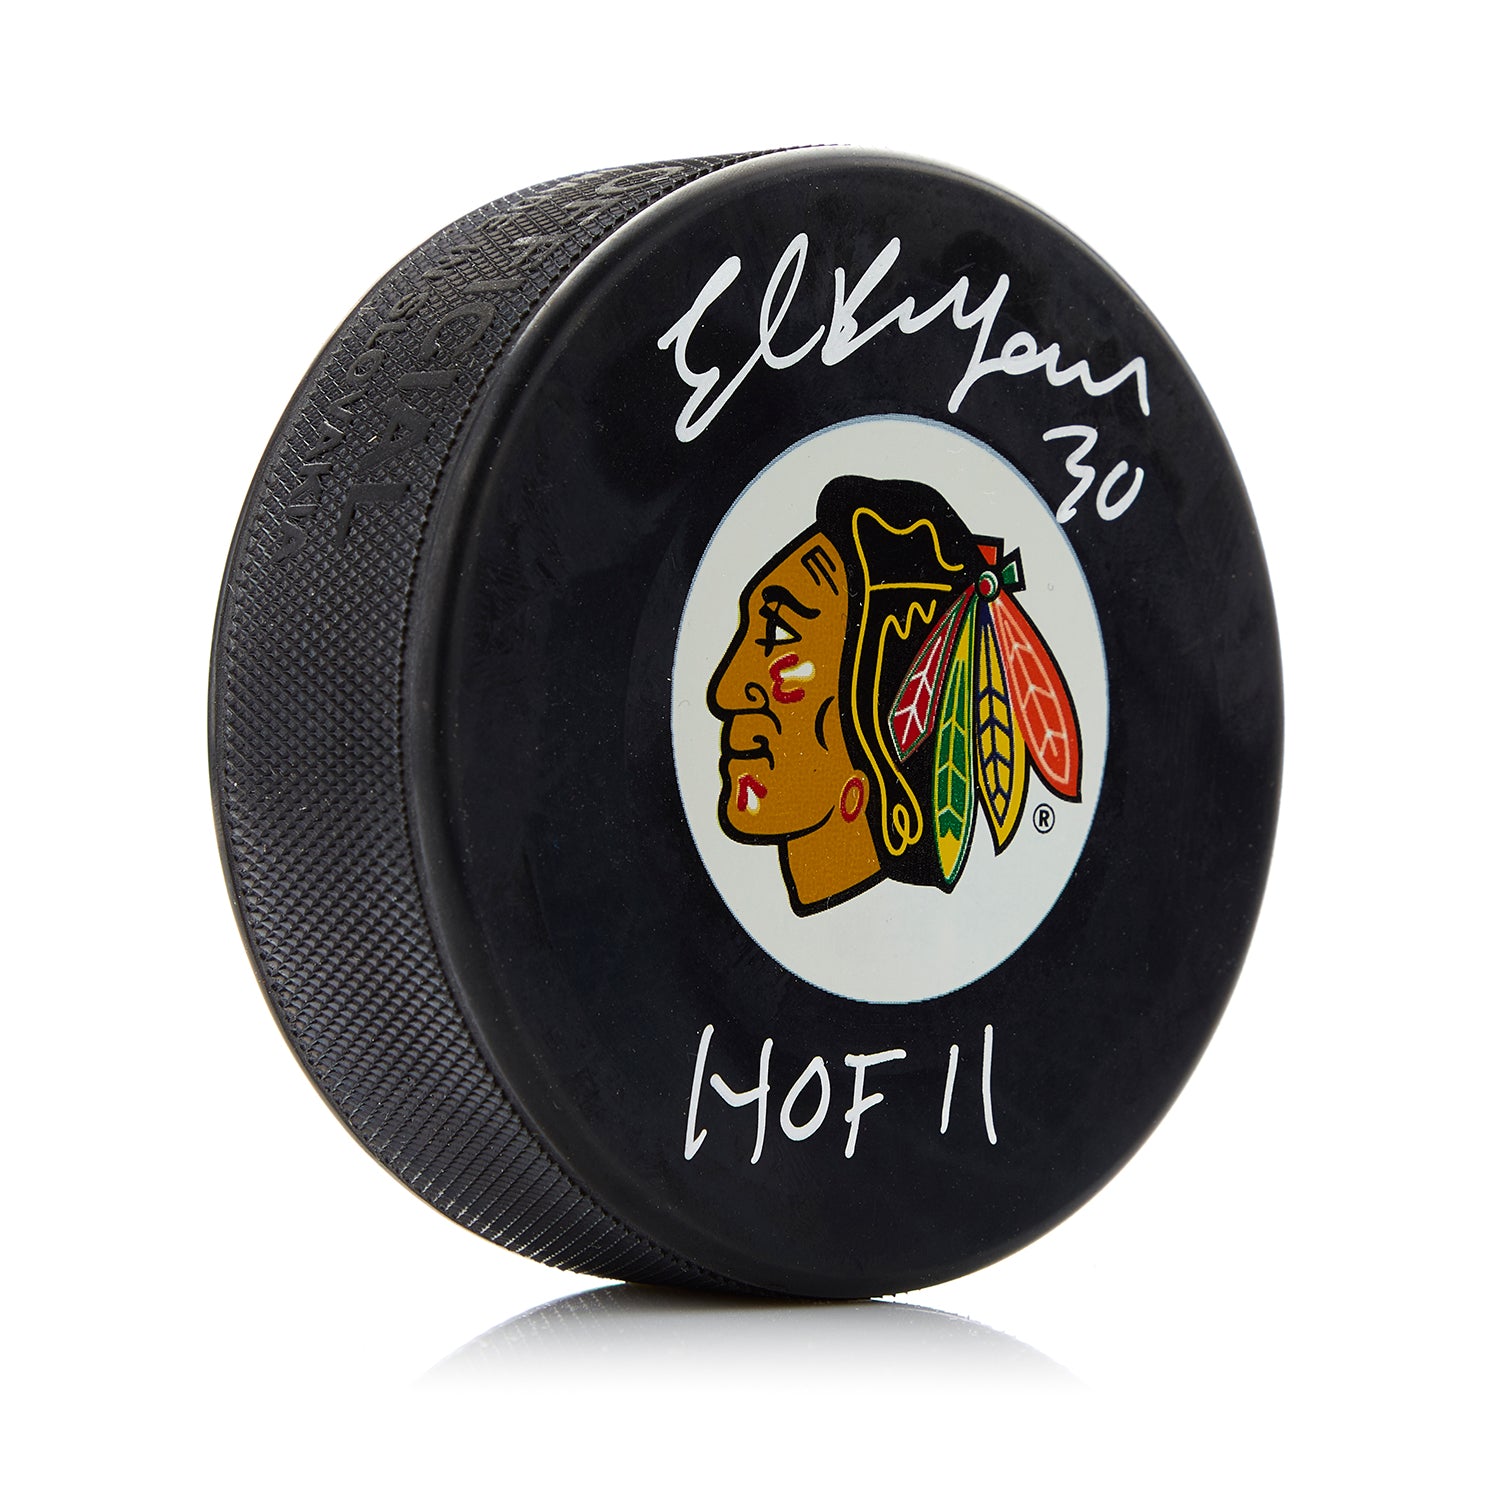 Ed Belfour Chicago Blackhawks Autographed Hockey Puck with HOF Note